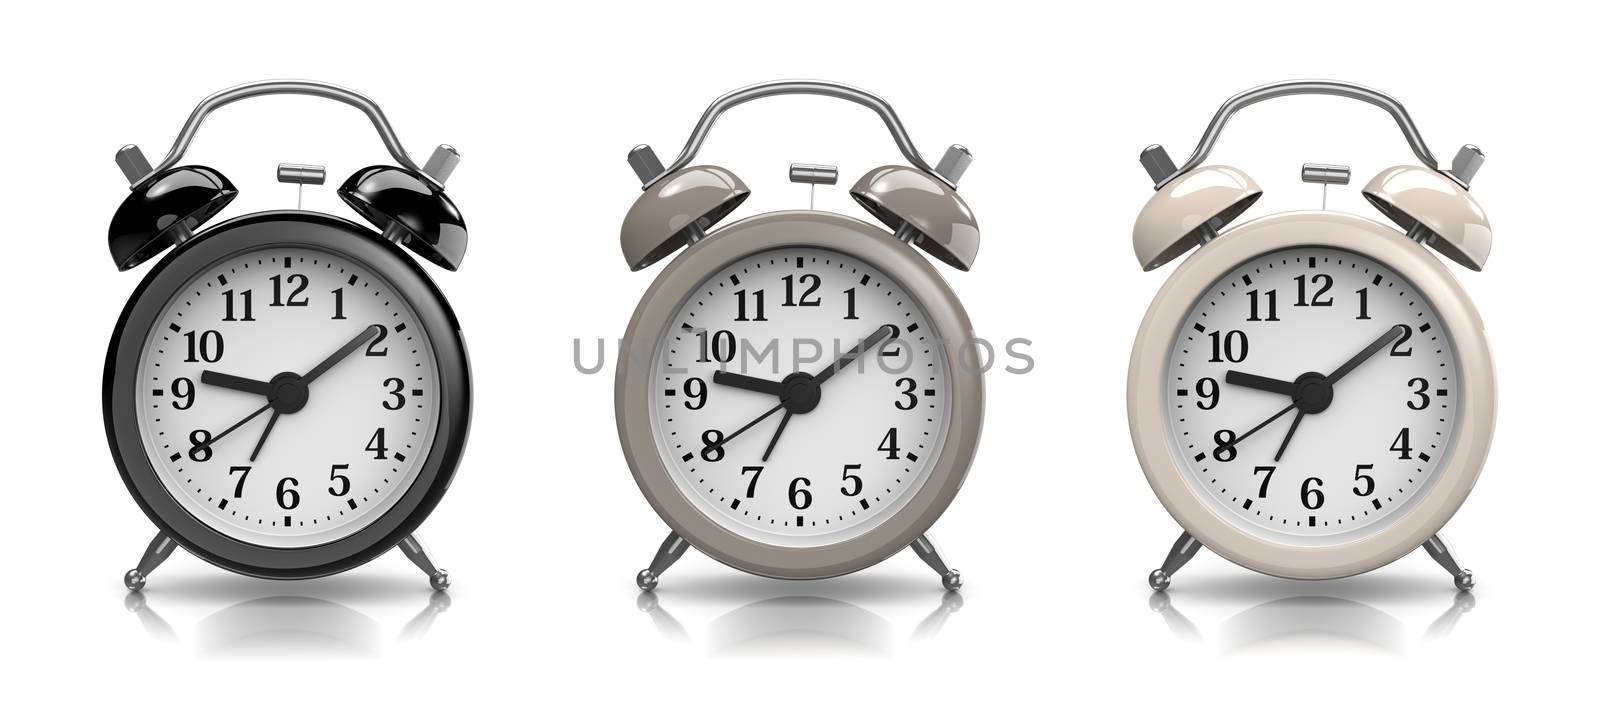 Black and White Vintage Alarm Clock Collection on White Background 3D Illustration